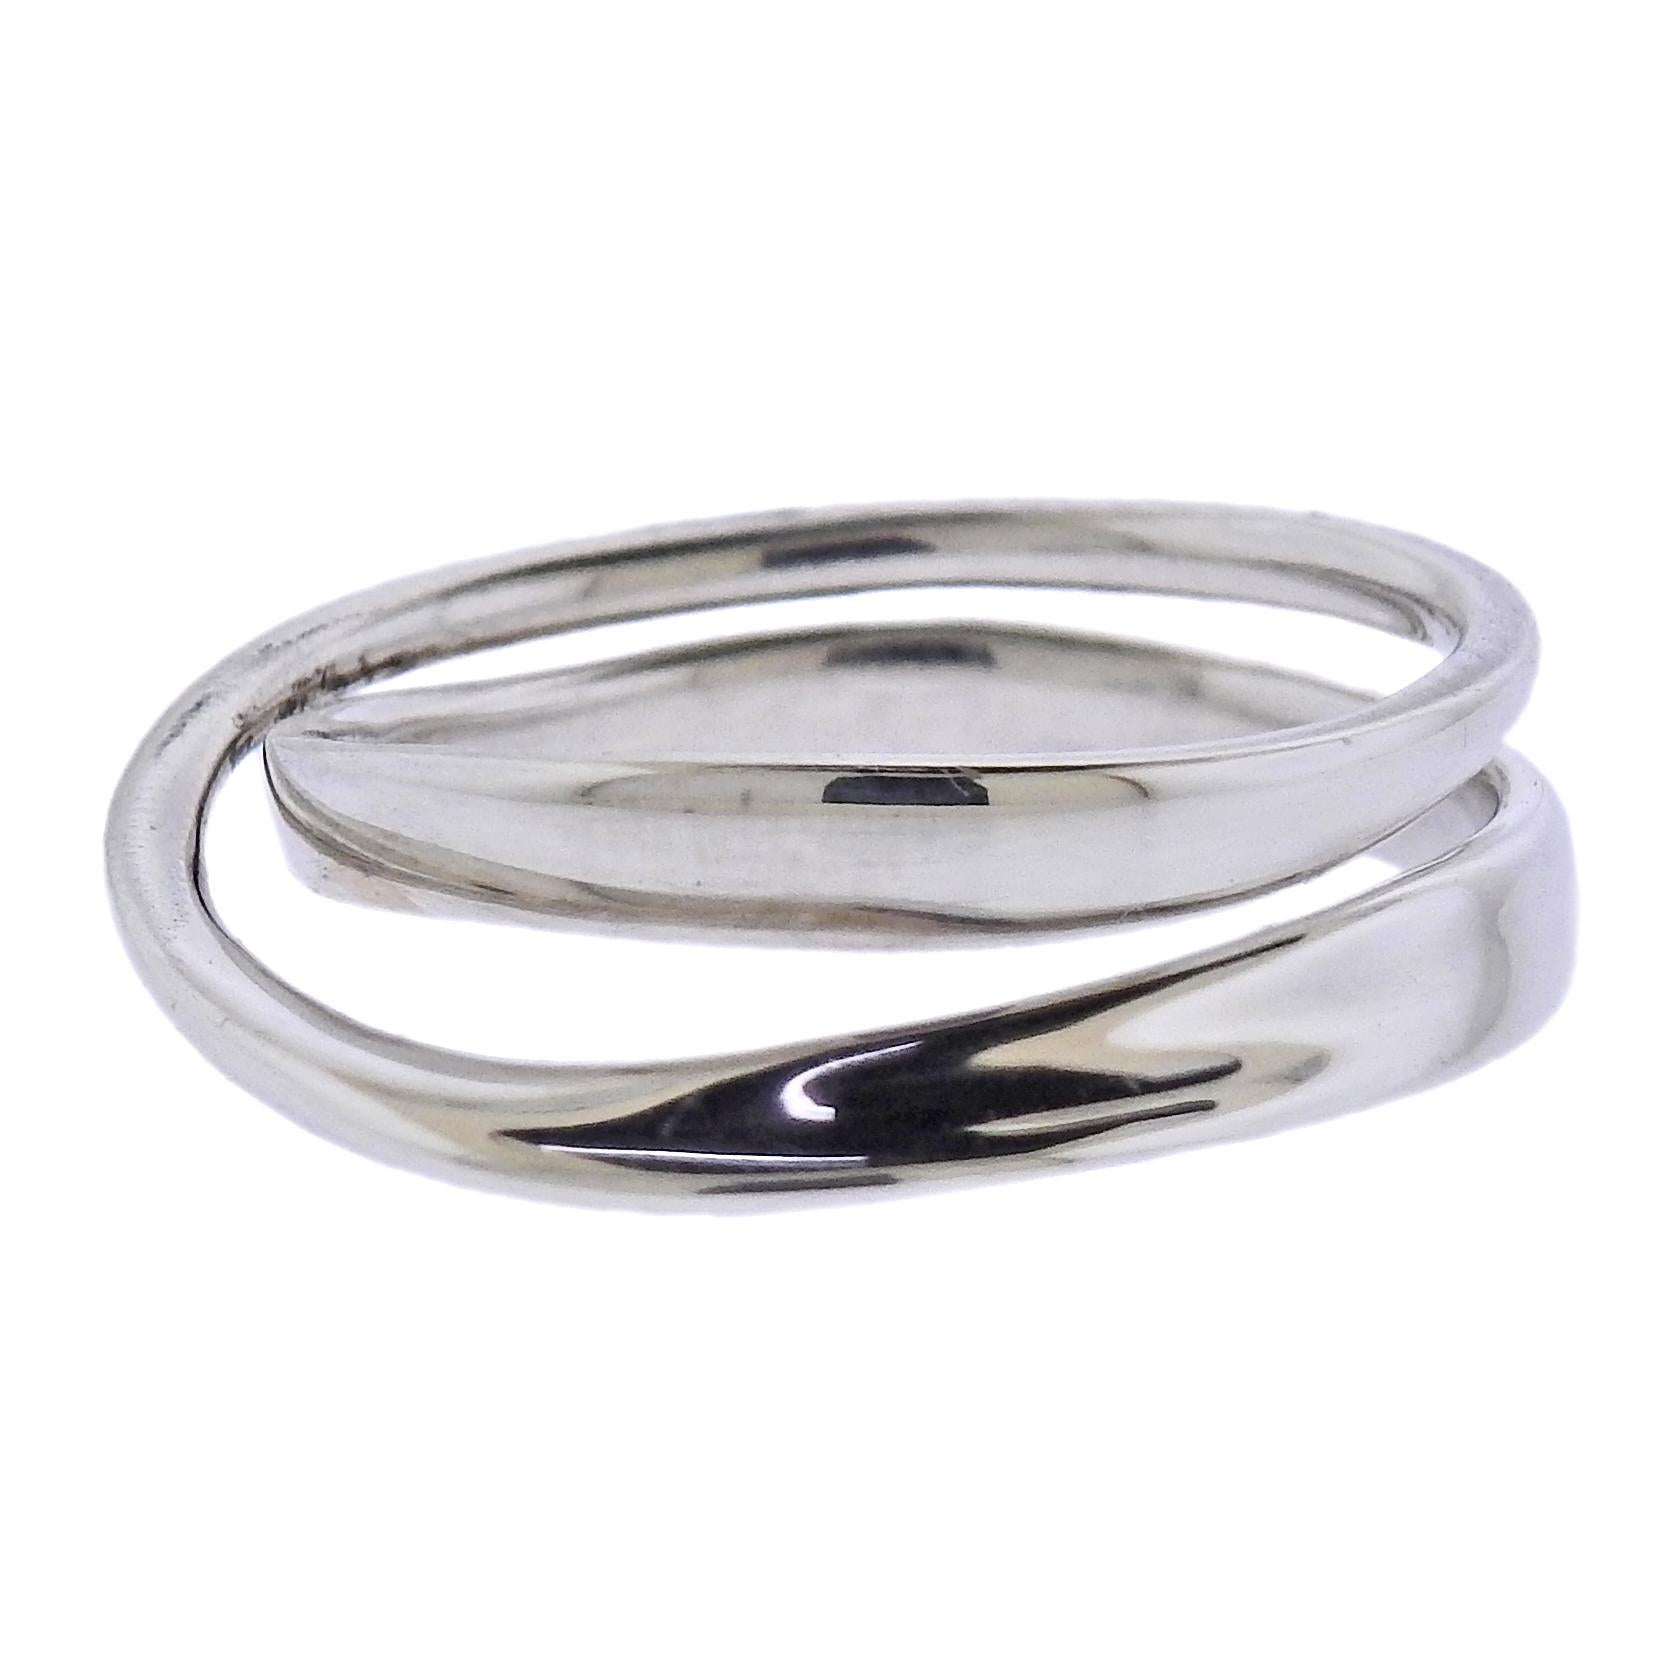 Brand new Georg Jensen sterling silver Moebius ring #369. Ring measures 3mm at the widest point and 1mm at the most narrow. Available in sizes: 51,52,54,55. Model#3552340. Marked: GJ, 925 S,Torun, 369. Weight is 3.0 grams.
